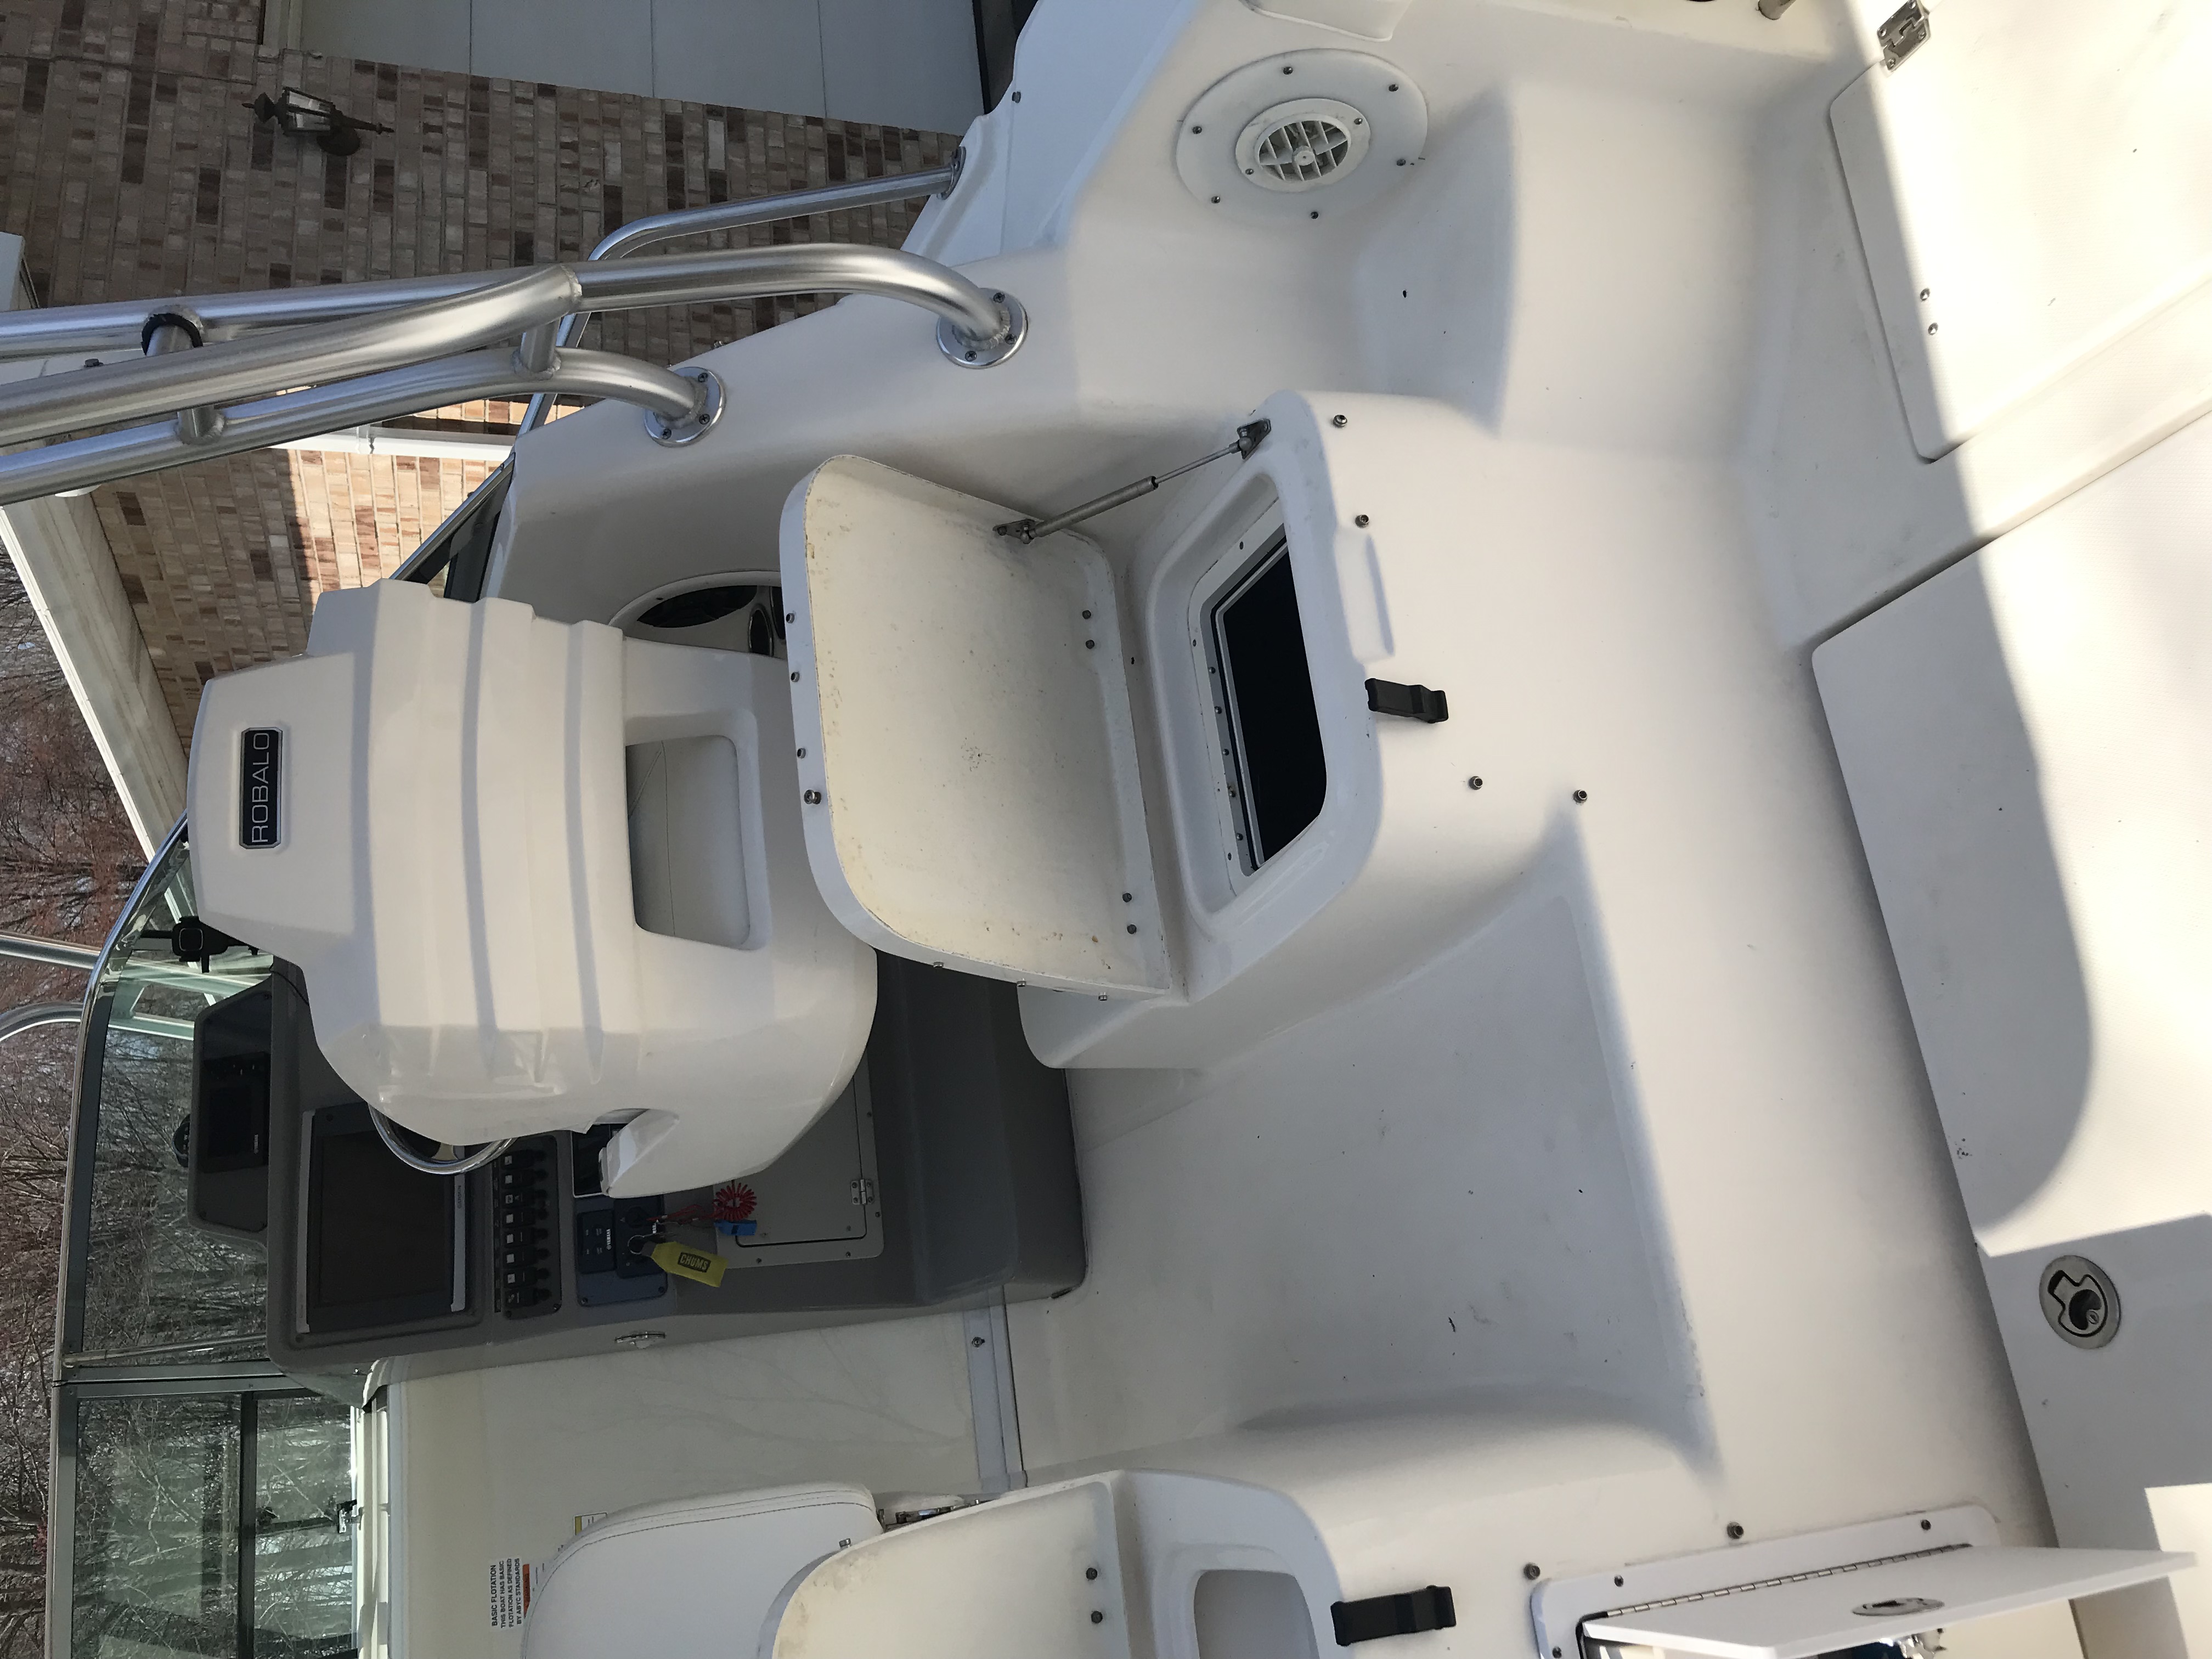 2014 Robalo R 305 wa Power boat for sale in Berlin Hts, OH - image 6 